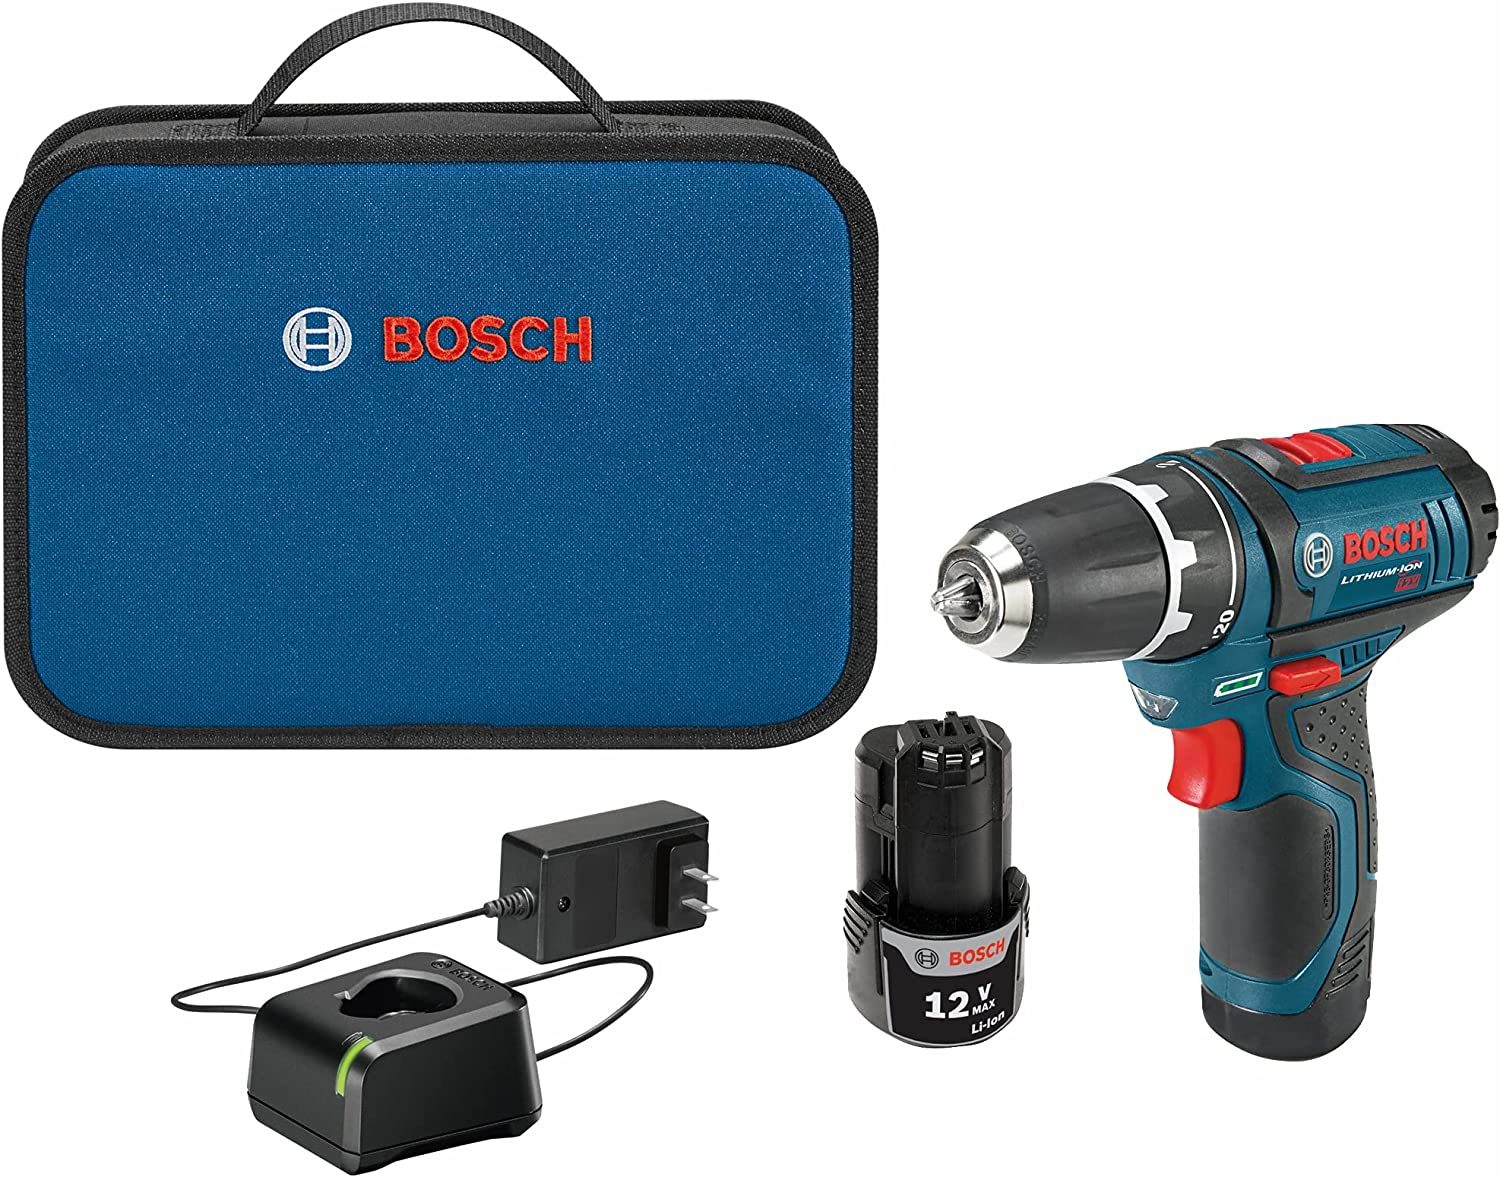 Bosch PS31-2A Power Tools Drill Kit